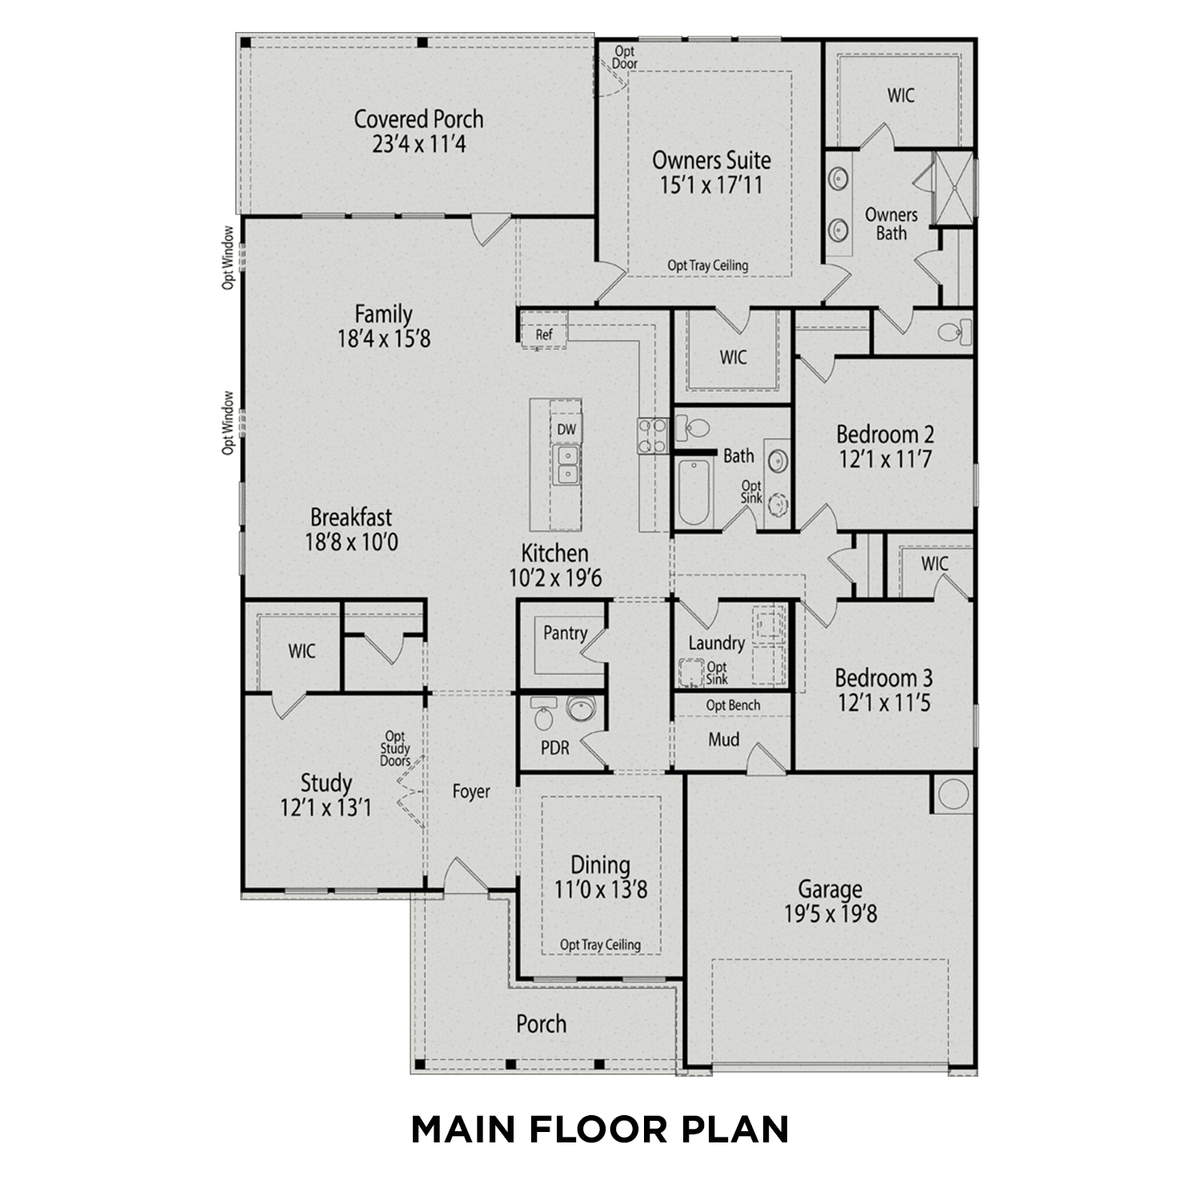 1 - The Magnolia B floor plan layout for 91 Grading Stick Court in Davidson Homes' Tobacco Road community.